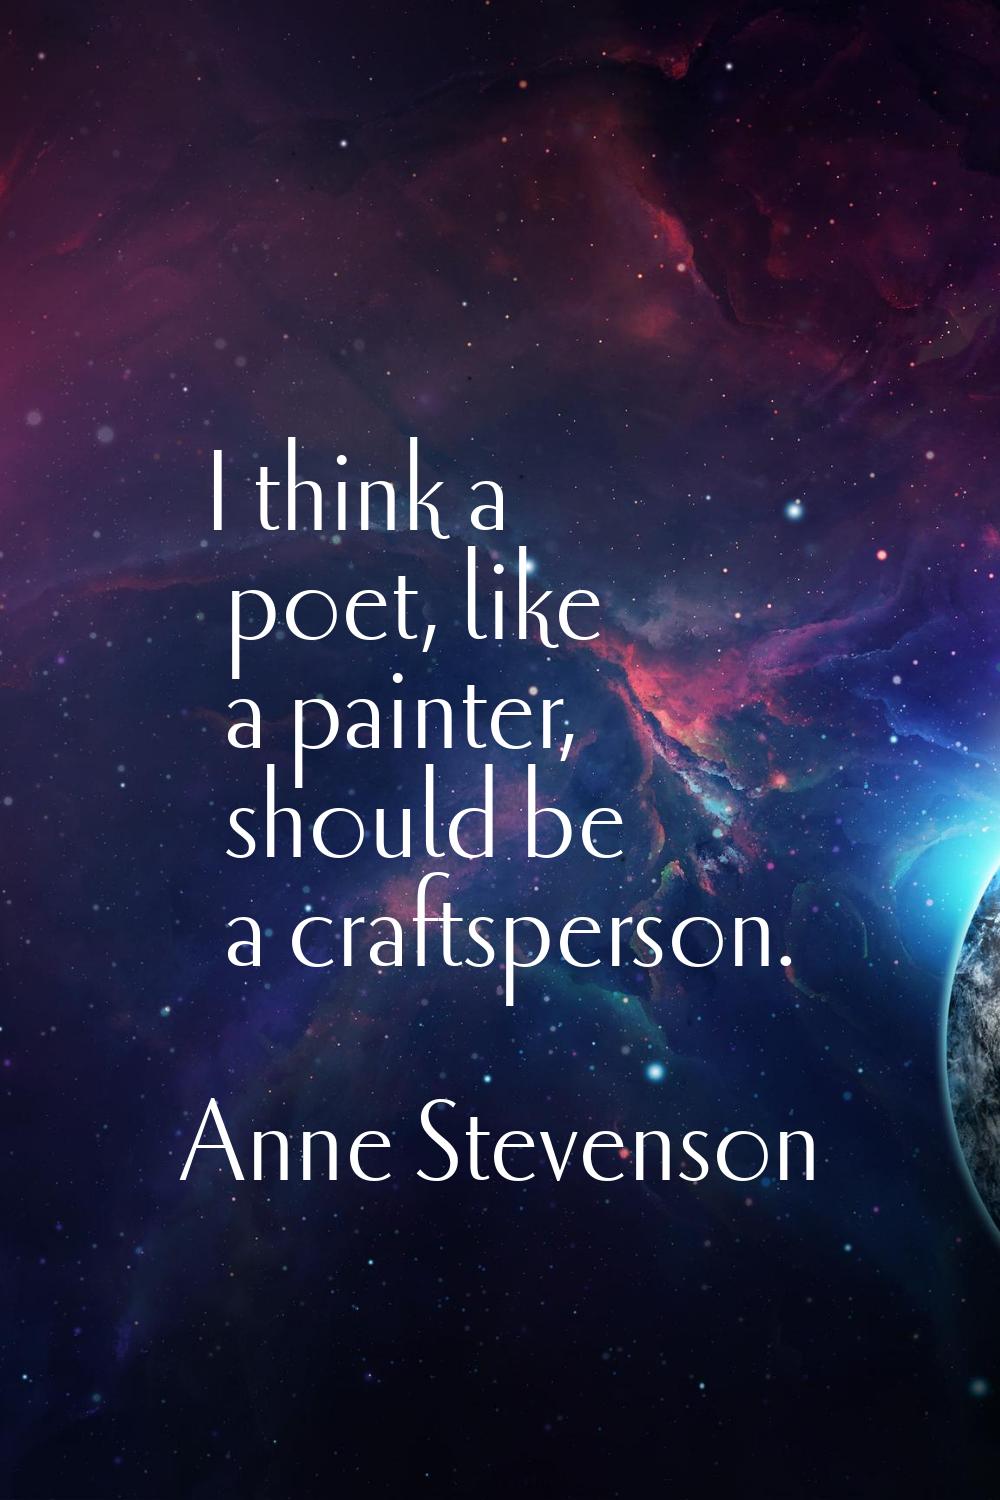 I think a poet, like a painter, should be a craftsperson.